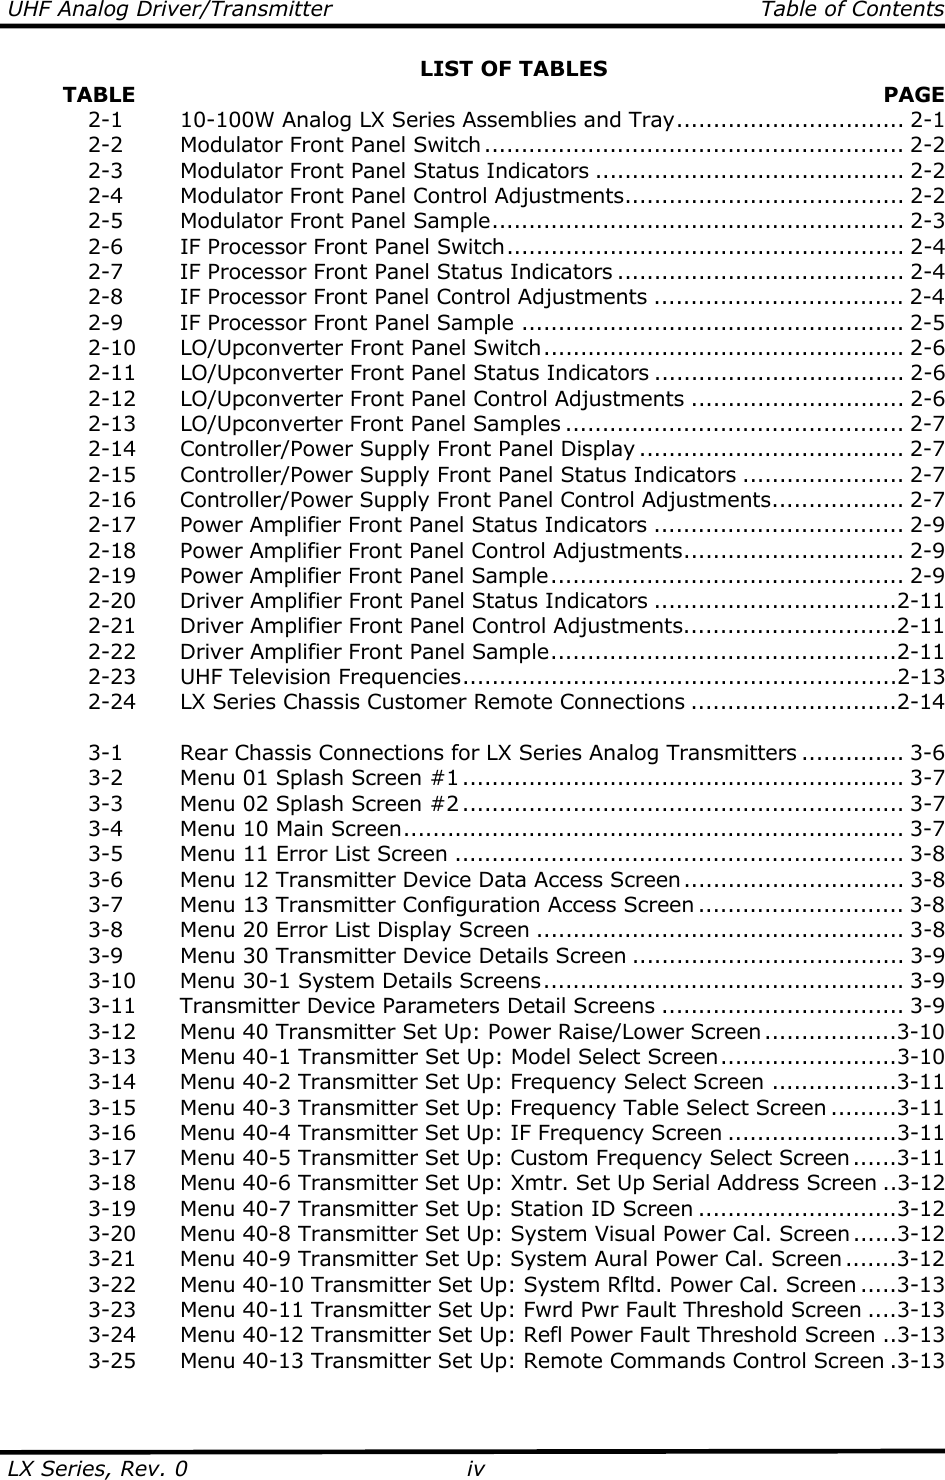 UHF Analog Driver/Transmitter   Table of Contents  LX Series, Rev. 0  ivLIST OF TABLES         TABLE   PAGE   2-1    10-100W Analog LX Series Assemblies and Tray............................... 2-1   2-2    Modulator Front Panel Switch......................................................... 2-2   2-3    Modulator Front Panel Status Indicators .......................................... 2-2   2-4    Modulator Front Panel Control Adjustments...................................... 2-2   2-5    Modulator Front Panel Sample........................................................ 2-3   2-6    IF Processor Front Panel Switch...................................................... 2-4   2-7    IF Processor Front Panel Status Indicators ....................................... 2-4   2-8    IF Processor Front Panel Control Adjustments .................................. 2-4   2-9    IF Processor Front Panel Sample .................................................... 2-5   2-10  LO/Upconverter Front Panel Switch................................................. 2-6   2-11  LO/Upconverter Front Panel Status Indicators .................................. 2-6   2-12  LO/Upconverter Front Panel Control Adjustments ............................. 2-6  2-13 LO/Upconverter Front Panel Samples .............................................. 2-7   2-14  Controller/Power Supply Front Panel Display .................................... 2-7   2-15  Controller/Power Supply Front Panel Status Indicators ...................... 2-7   2-16  Controller/Power Supply Front Panel Control Adjustments.................. 2-7   2-17  Power Amplifier Front Panel Status Indicators .................................. 2-9   2-18  Power Amplifier Front Panel Control Adjustments.............................. 2-9  2-19 Power Amplifier Front Panel Sample................................................ 2-9   2-20  Driver Amplifier Front Panel Status Indicators .................................2-11   2-21  Driver Amplifier Front Panel Control Adjustments.............................2-11  2-22 Driver Amplifier Front Panel Sample...............................................2-11   2-23  UHF Television Frequencies...........................................................2-13  2-24  LX Series Chassis Customer Remote Connections ............................2-14    3-1    Rear Chassis Connections for LX Series Analog Transmitters .............. 3-6   3-2    Menu 01 Splash Screen #1 ............................................................ 3-7   3-3    Menu 02 Splash Screen #2 ............................................................ 3-7   3-4    Menu 10 Main Screen.................................................................... 3-7   3-5    Menu 11 Error List Screen ............................................................. 3-8   3-6    Menu 12 Transmitter Device Data Access Screen.............................. 3-8   3-7    Menu 13 Transmitter Configuration Access Screen ............................ 3-8   3-8    Menu 20 Error List Display Screen .................................................. 3-8   3-9    Menu 30 Transmitter Device Details Screen ..................................... 3-9  3-10 Menu 30-1 System Details Screens................................................. 3-9  3-11 Transmitter Device Parameters Detail Screens ................................. 3-9   3-12  Menu 40 Transmitter Set Up: Power Raise/Lower Screen ..................3-10   3-13  Menu 40-1 Transmitter Set Up: Model Select Screen........................3-10   3-14  Menu 40-2 Transmitter Set Up: Frequency Select Screen .................3-11   3-15  Menu 40-3 Transmitter Set Up: Frequency Table Select Screen .........3-11   3-16  Menu 40-4 Transmitter Set Up: IF Frequency Screen .......................3-11   3-17  Menu 40-5 Transmitter Set Up: Custom Frequency Select Screen......3-11   3-18  Menu 40-6 Transmitter Set Up: Xmtr. Set Up Serial Address Screen ..3-12   3-19  Menu 40-7 Transmitter Set Up: Station ID Screen ...........................3-12   3-20  Menu 40-8 Transmitter Set Up: System Visual Power Cal. Screen ......3-12   3-21  Menu 40-9 Transmitter Set Up: System Aural Power Cal. Screen .......3-12   3-22  Menu 40-10 Transmitter Set Up: System Rfltd. Power Cal. Screen .....3-13   3-23  Menu 40-11 Transmitter Set Up: Fwrd Pwr Fault Threshold Screen ....3-13   3-24  Menu 40-12 Transmitter Set Up: Refl Power Fault Threshold Screen ..3-13   3-25  Menu 40-13 Transmitter Set Up: Remote Commands Control Screen .3-13  